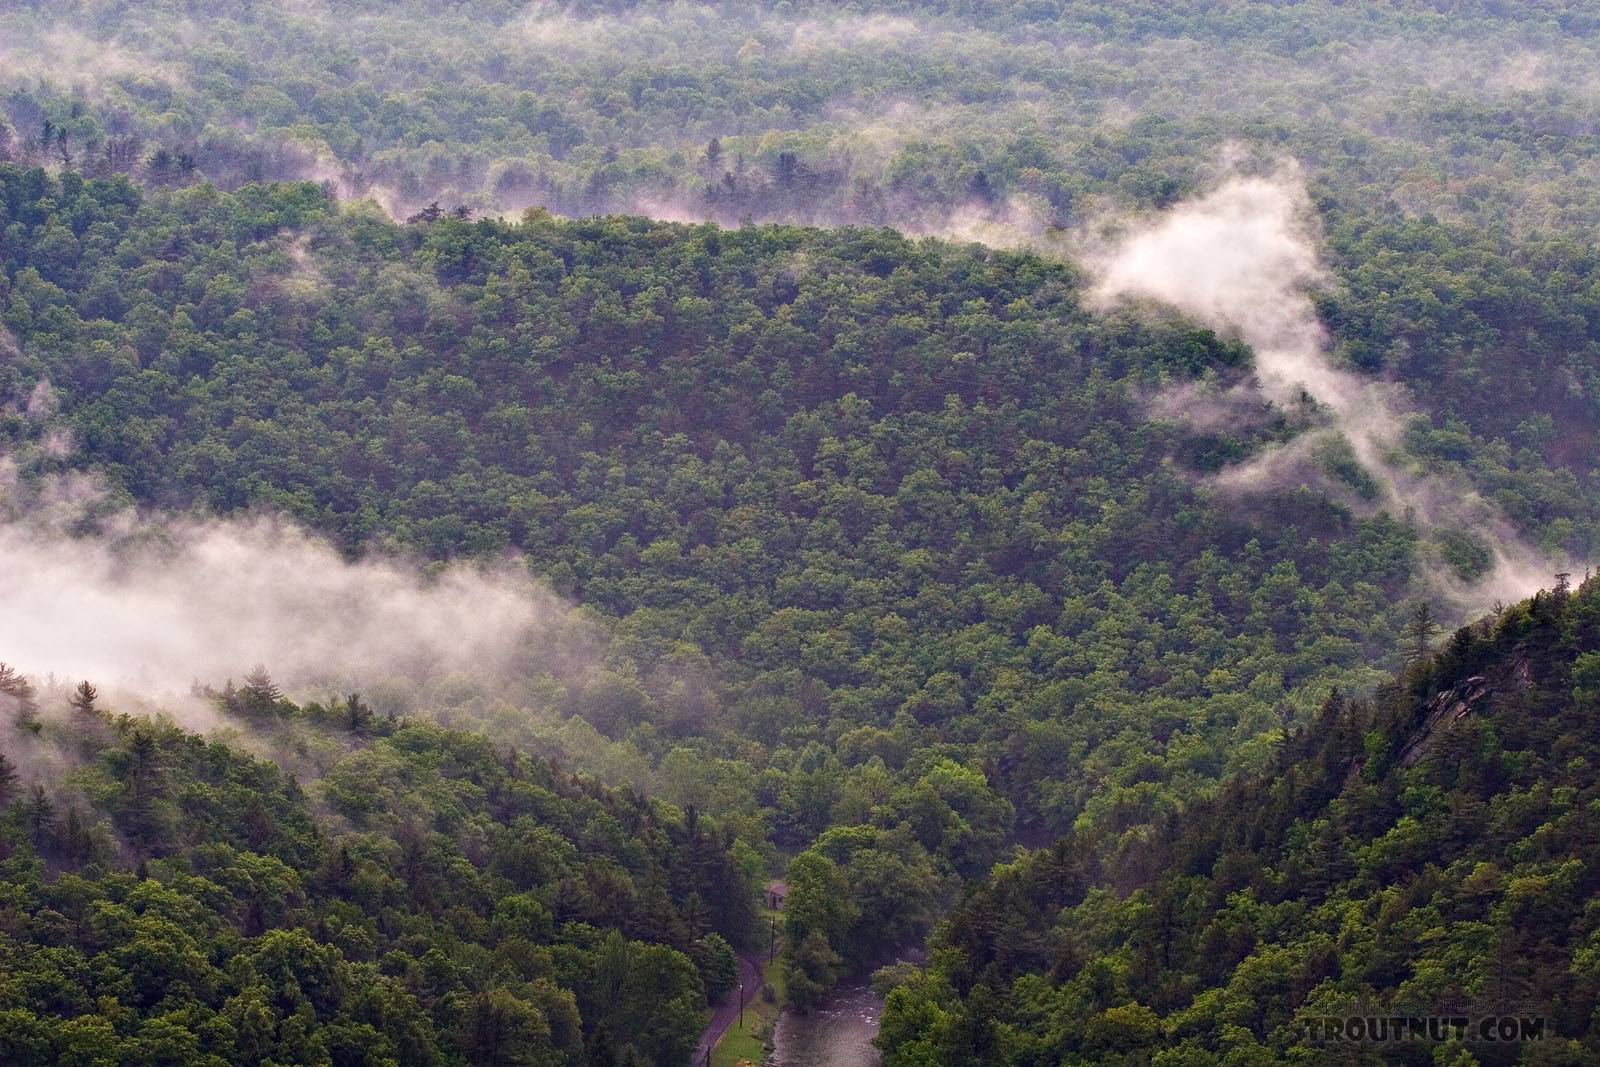 An afternoon thunderstorm left mist in all the valleys along this limestone spring creek in Pennsylvania. From Penn's Creek in Pennsylvania.